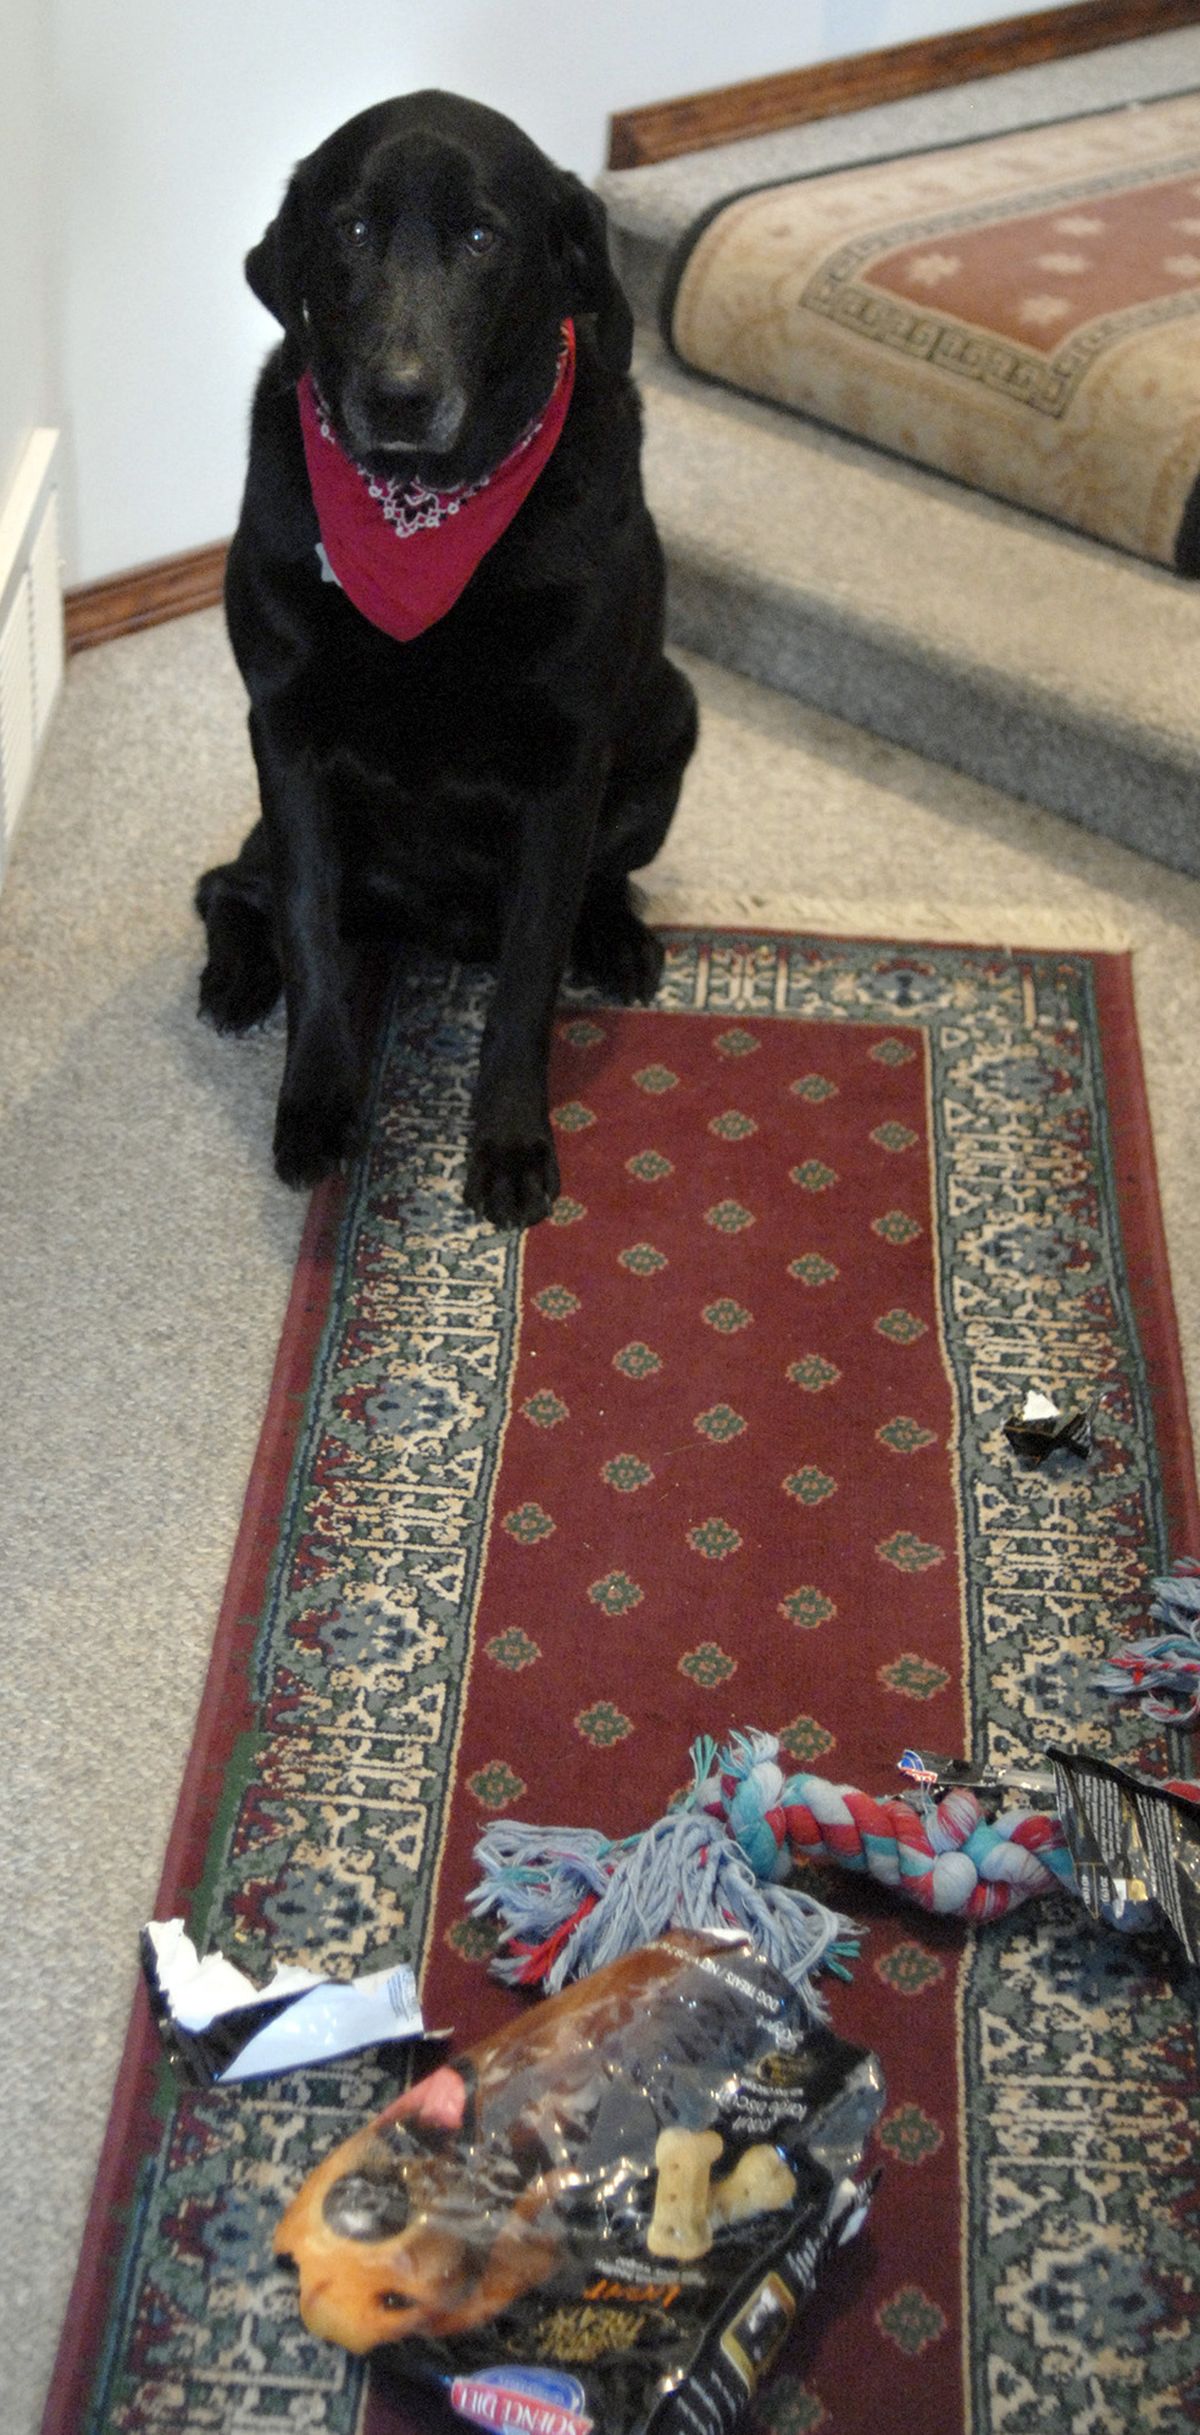 Christopher Anderson’s black Lab mix, Chewie, sits next to the scene of the crime in their Spokane home: a gutted bag of dog treats that he pulled off the counter. (Liz Kishimoto)